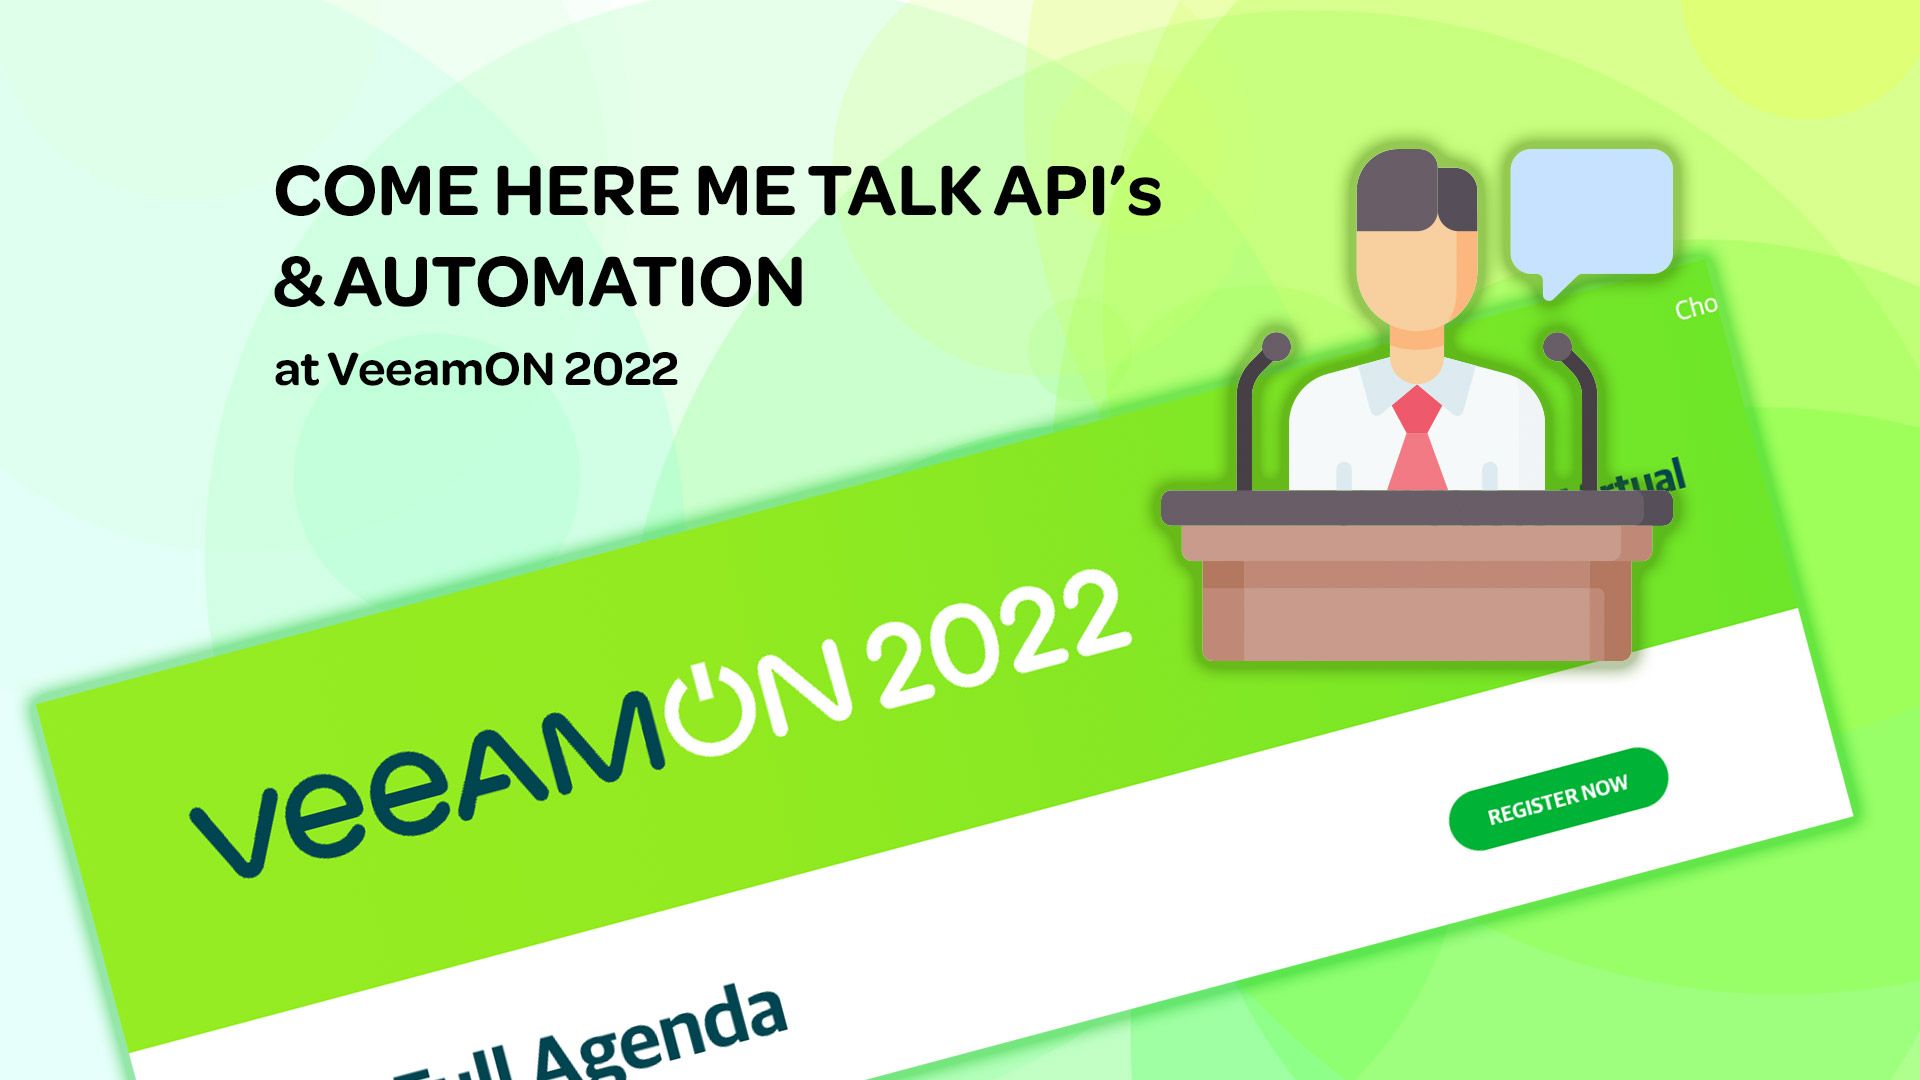 I am speaking (twice) at VeeamON 2022 - come have a listen! (in person or virtual)